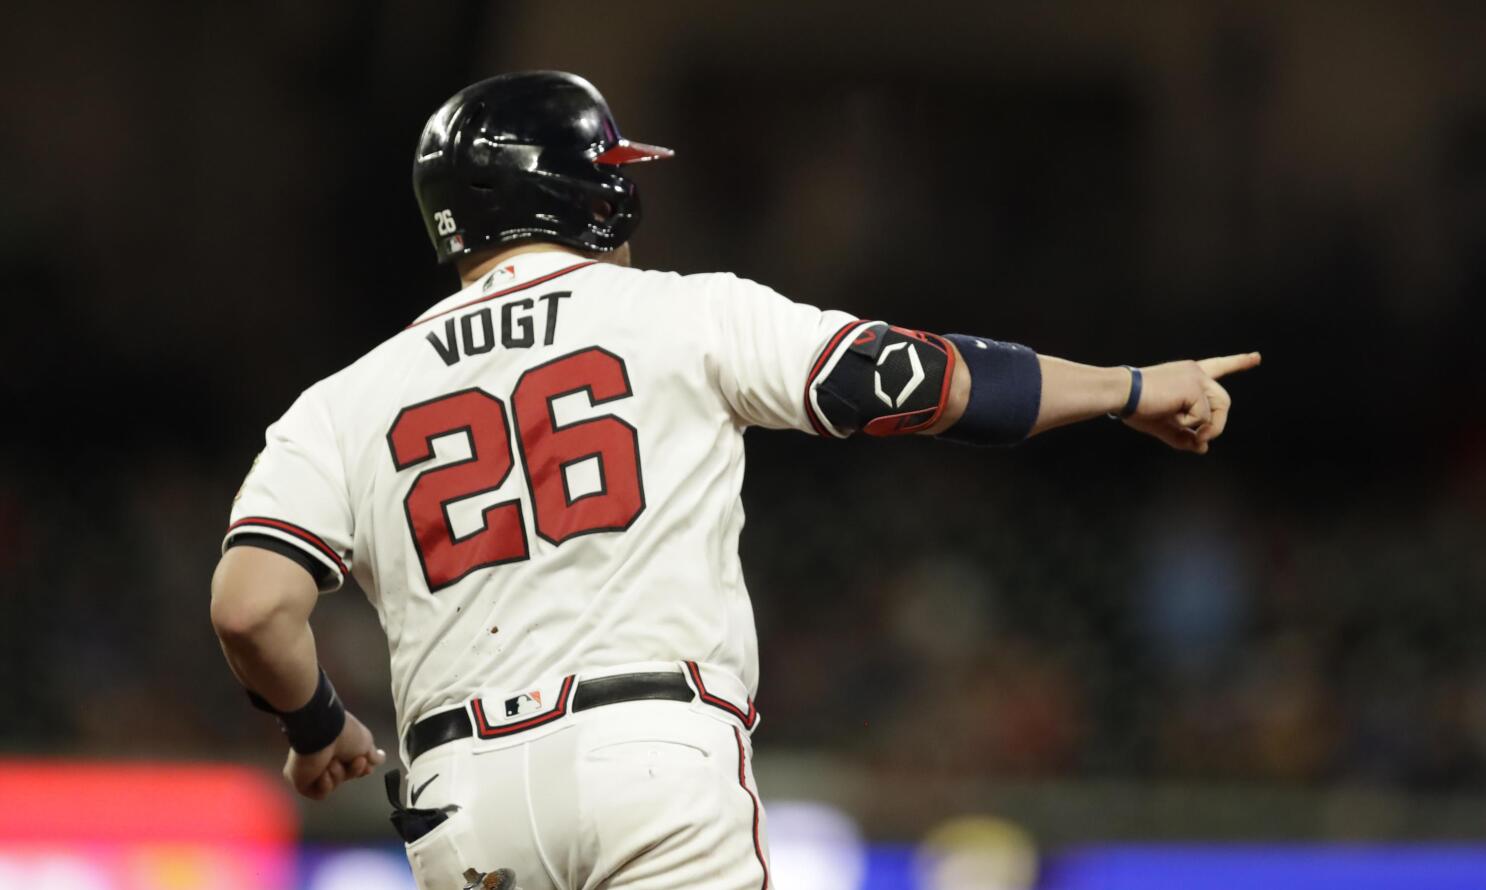 Braves pitchers Will Smith, Luke Jackson talk ahead of Game 5